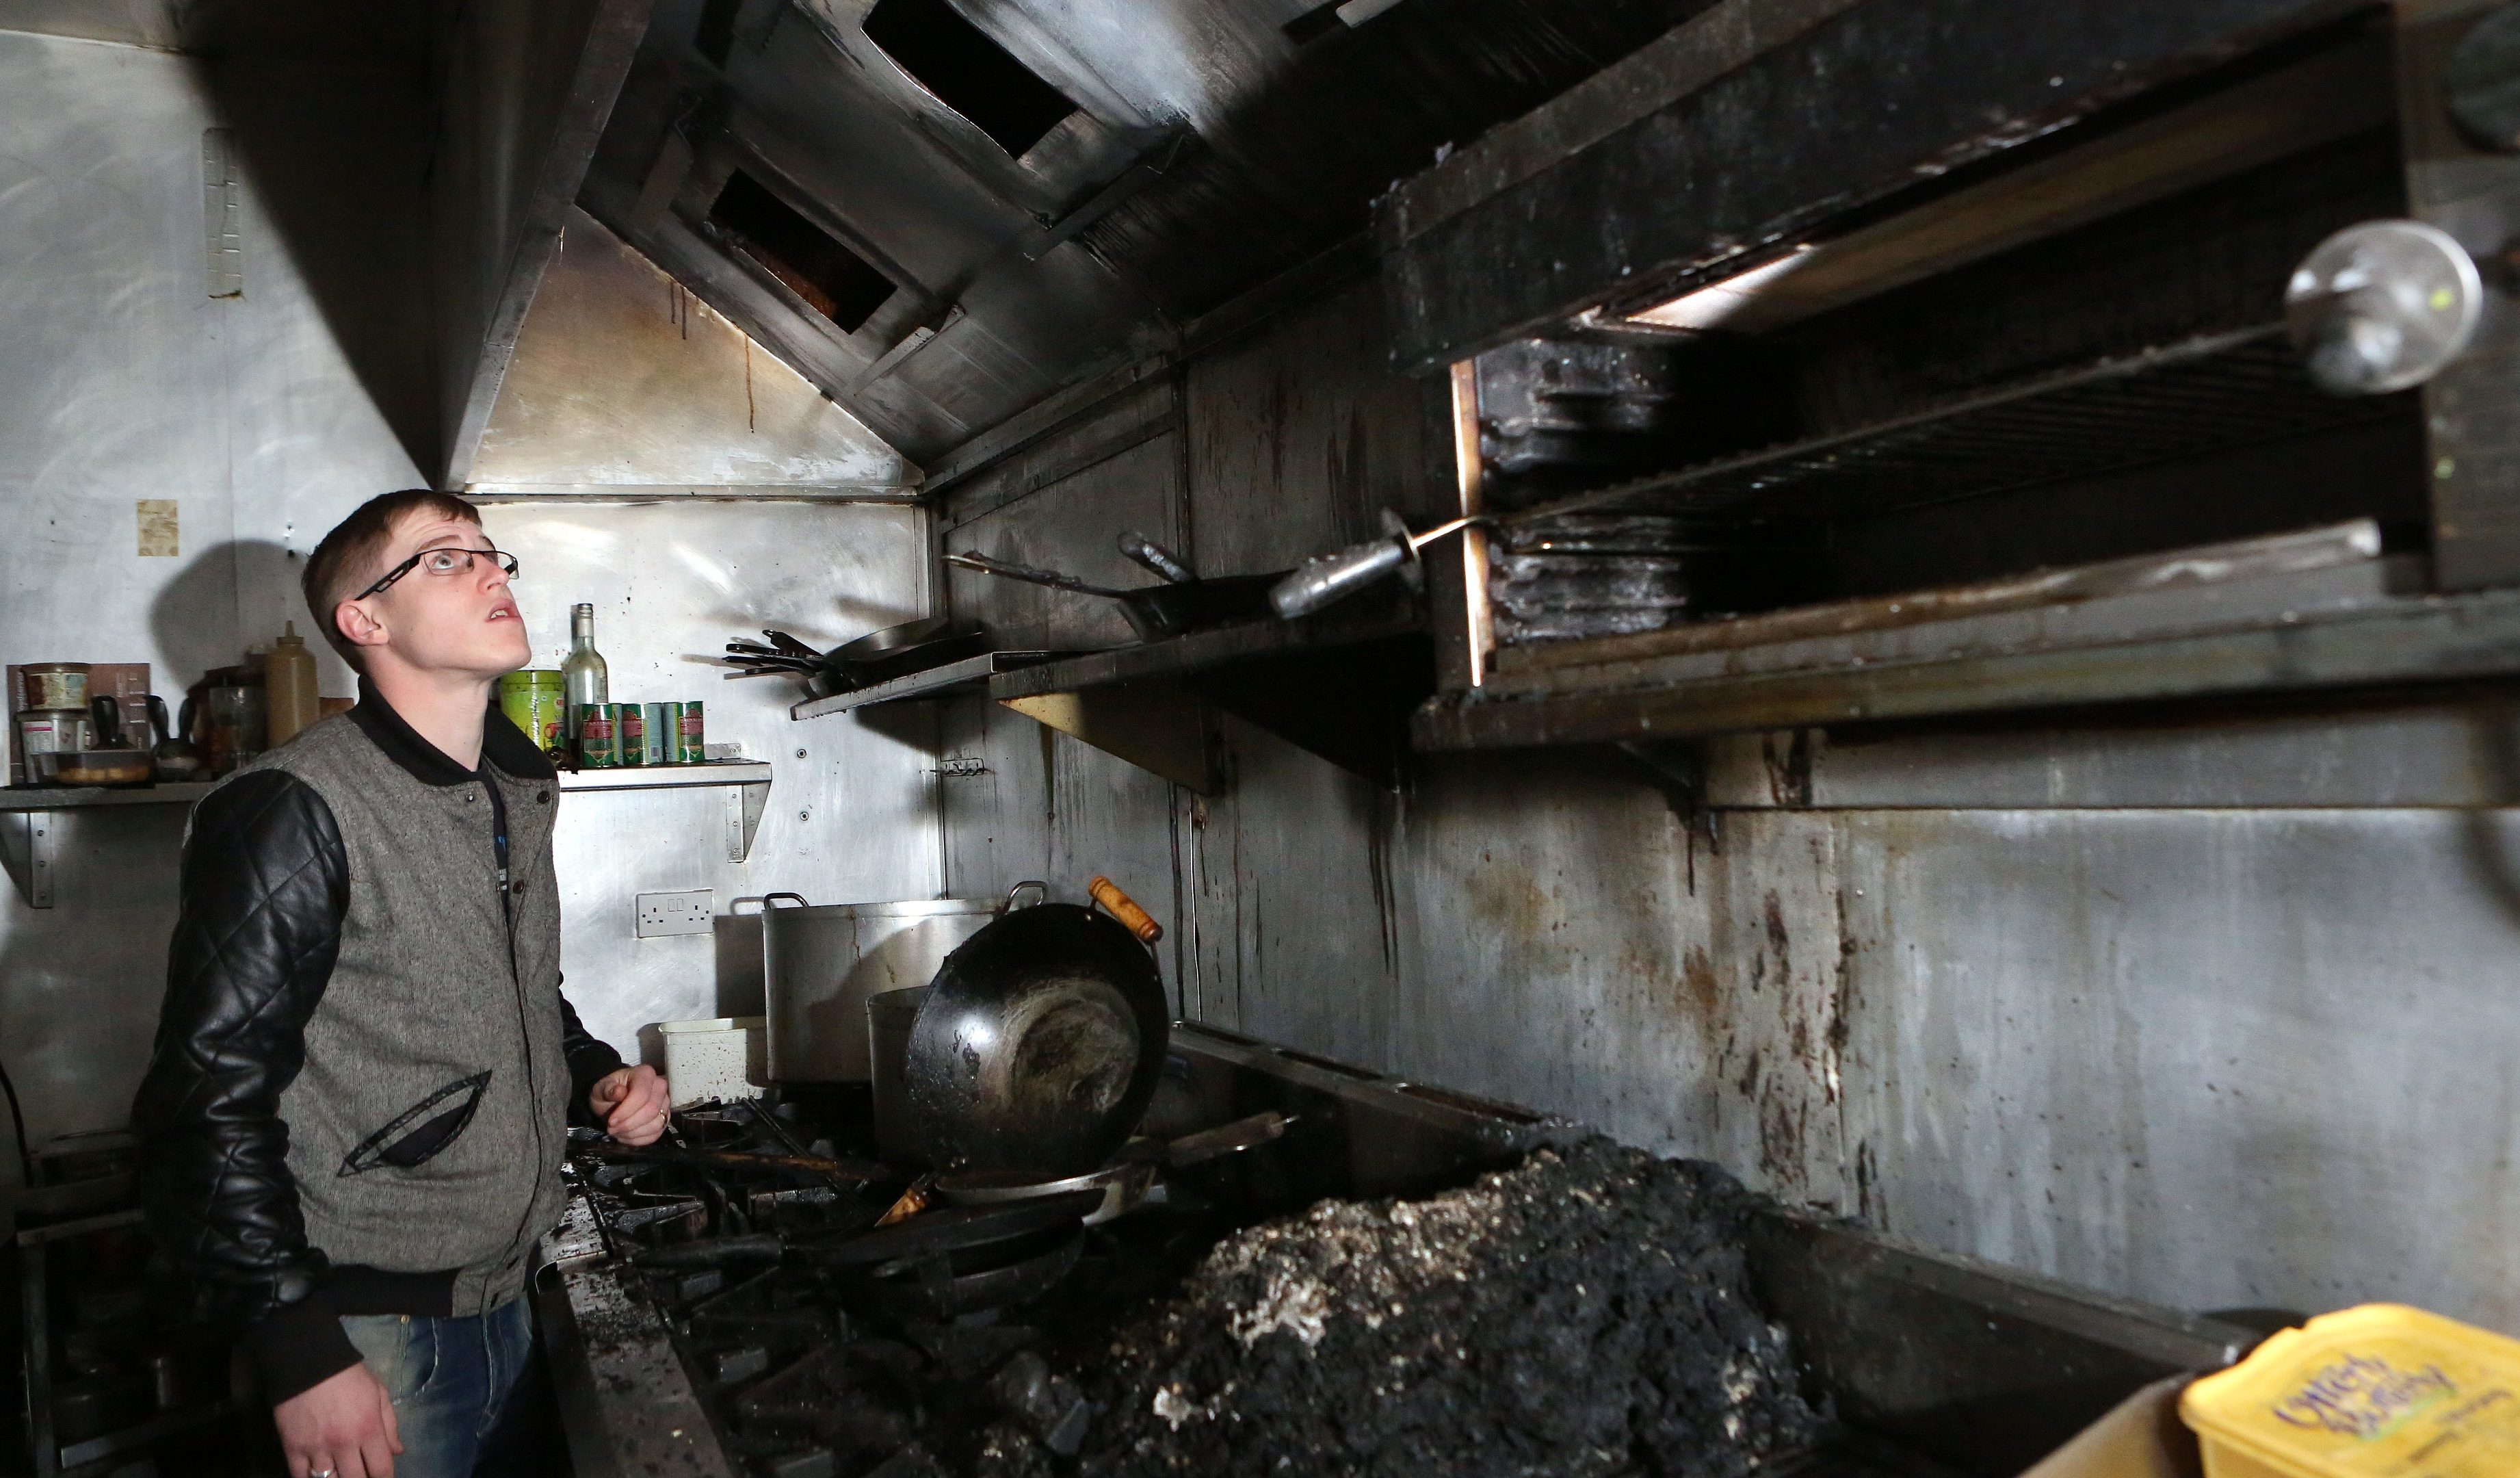 Staff member Kenny Hastie in the kitchen in the aftermath of the fire in Mint Restaurant